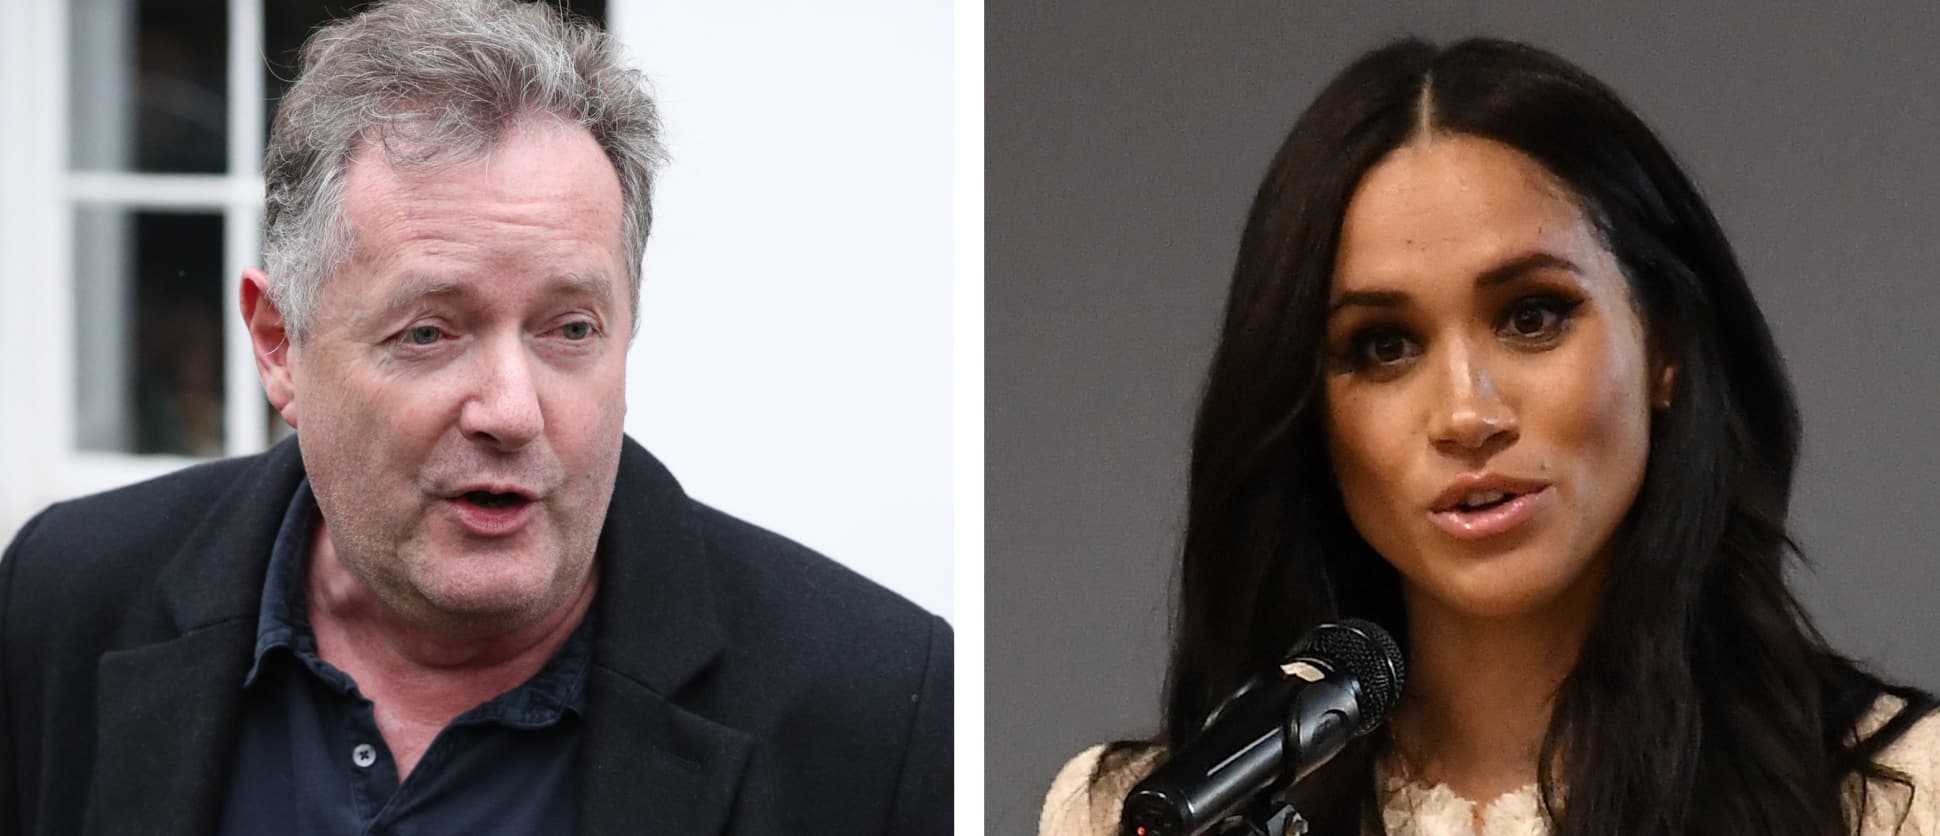 Piers Morgan adamant there is ‘no racism’ towards Meghan Markle as his viewing figures nosedive